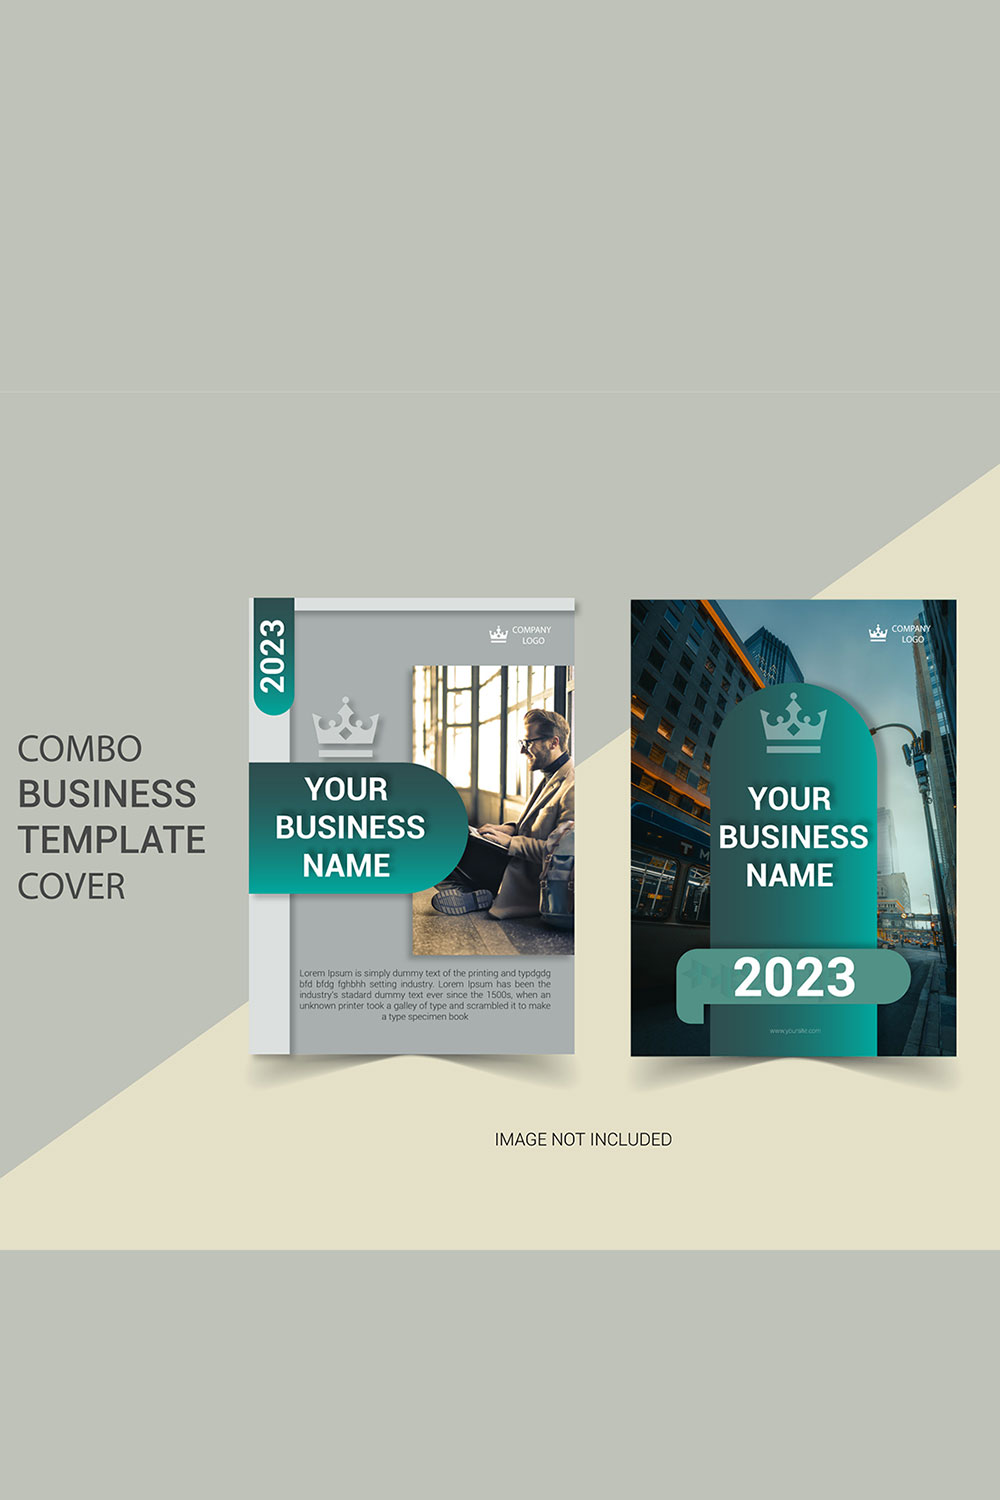 Combo business template cover pinterest preview image.